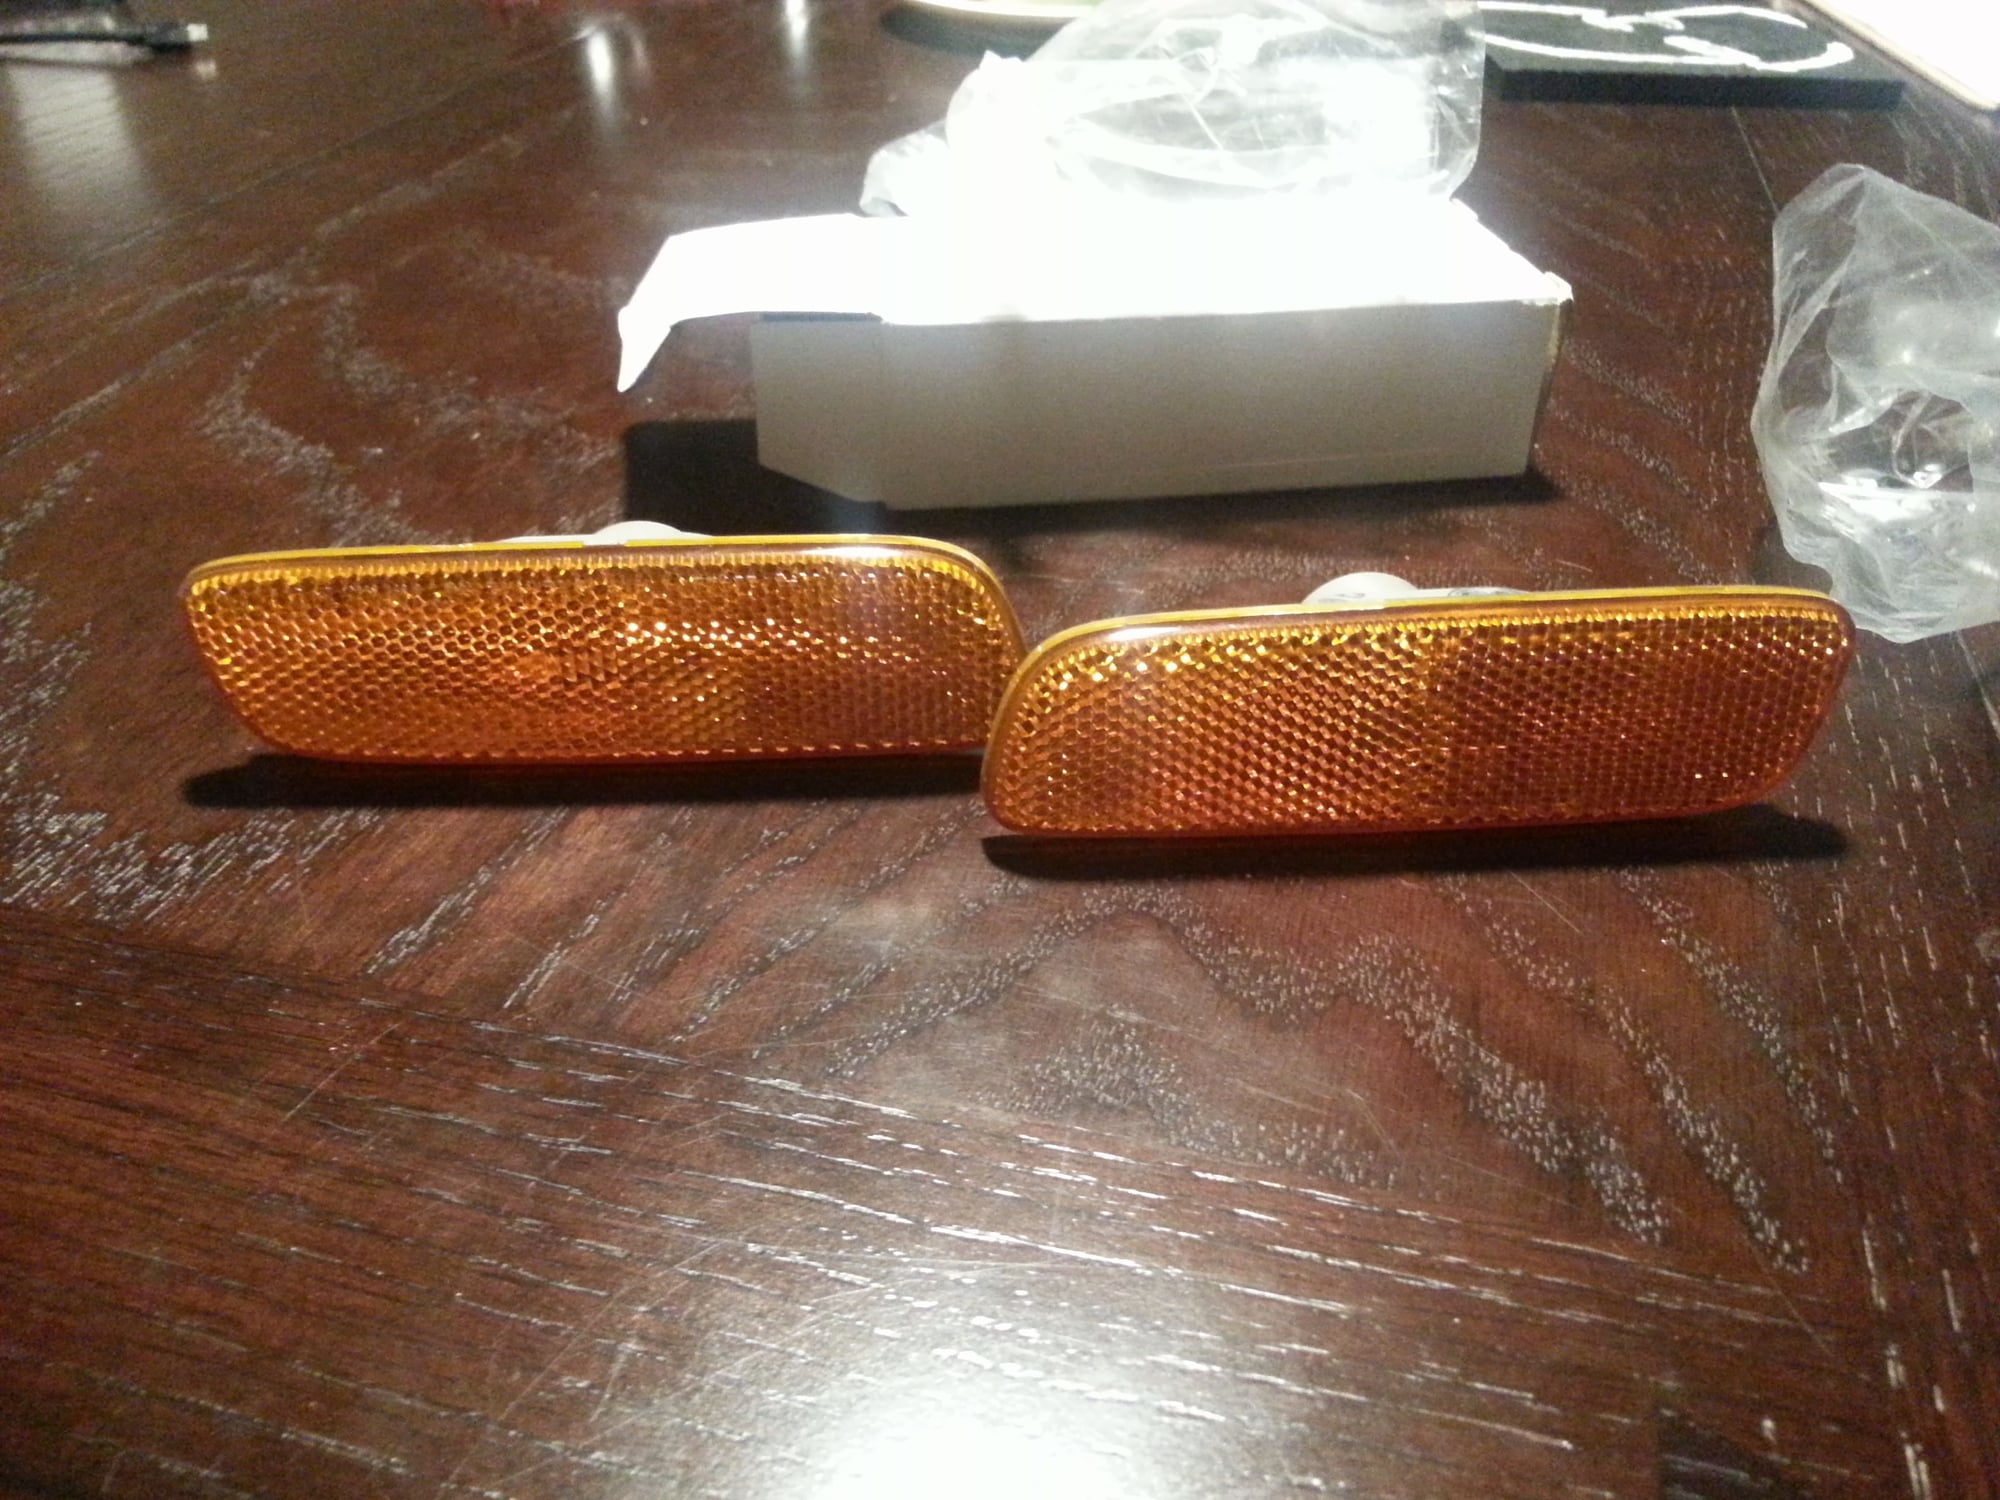 Lights - OEM mint front side markers $10 - Used - 1998 to 2005 Lexus GS300 - Huntington Beach, CA 92647, United States